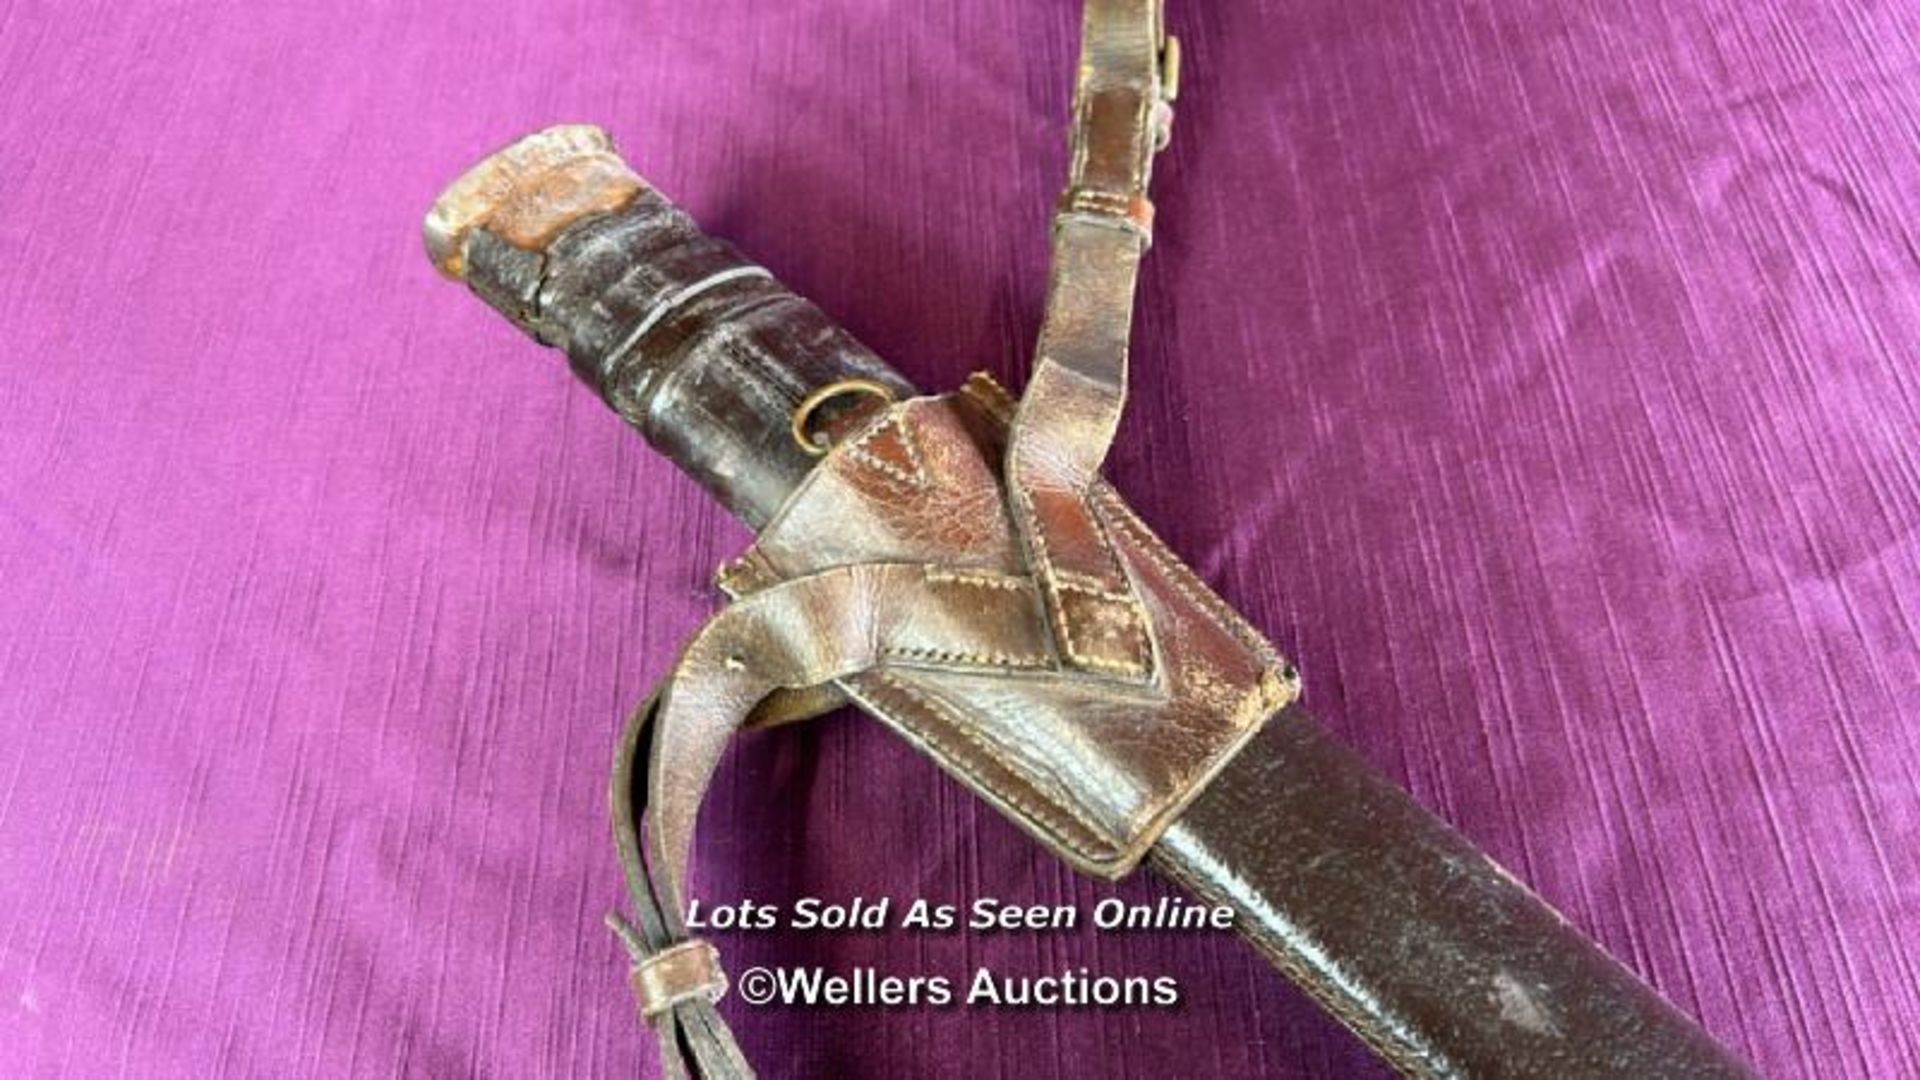 ANTIQUE INFANTRY OFFICERS SWORD WITH LEATHER SCABBARD, LENGTH 99CM - Image 10 of 12